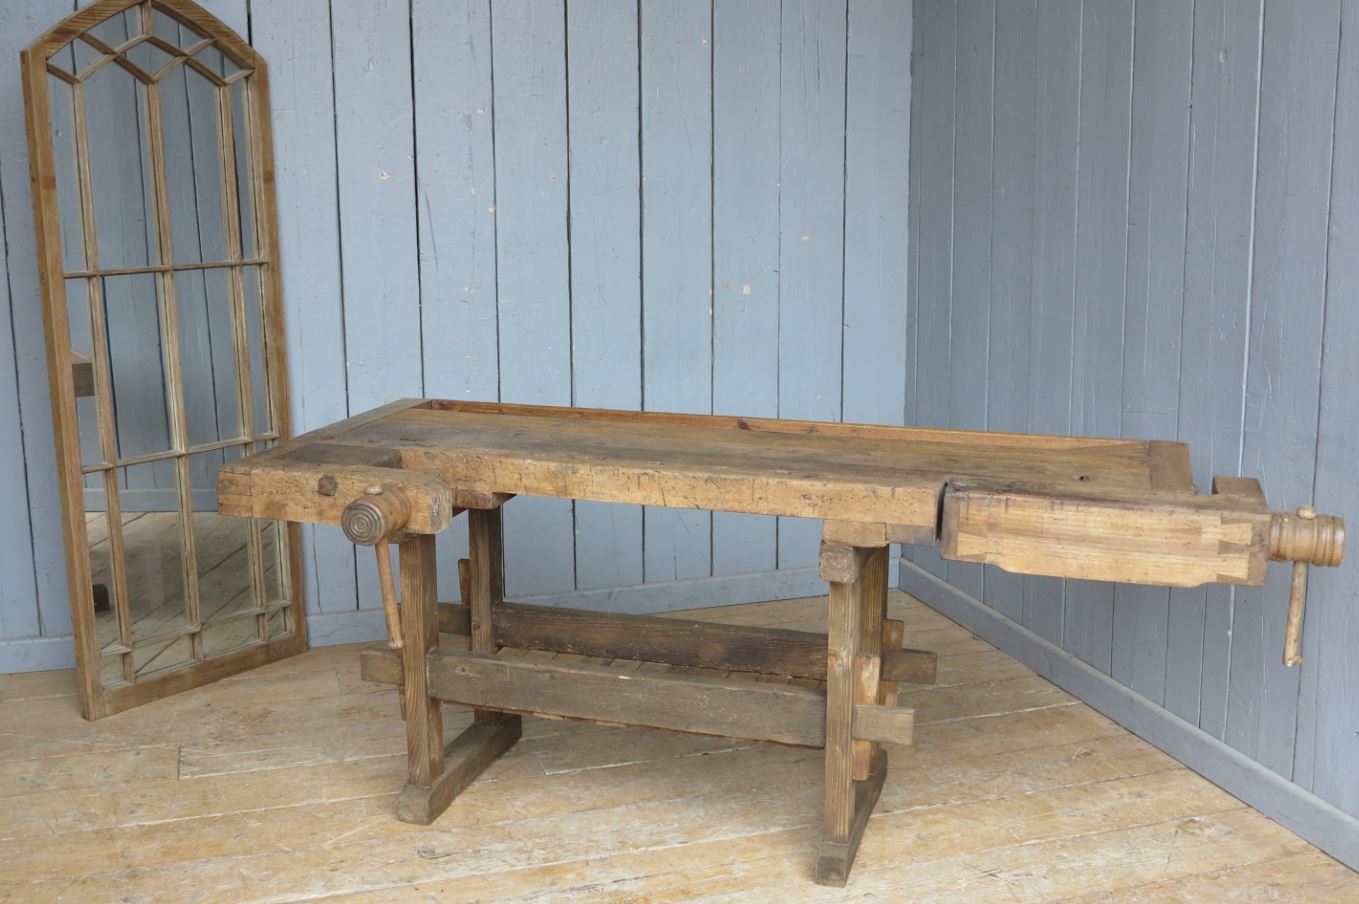 UKAA vice for sale reclaimed pine work bench reclaimed 